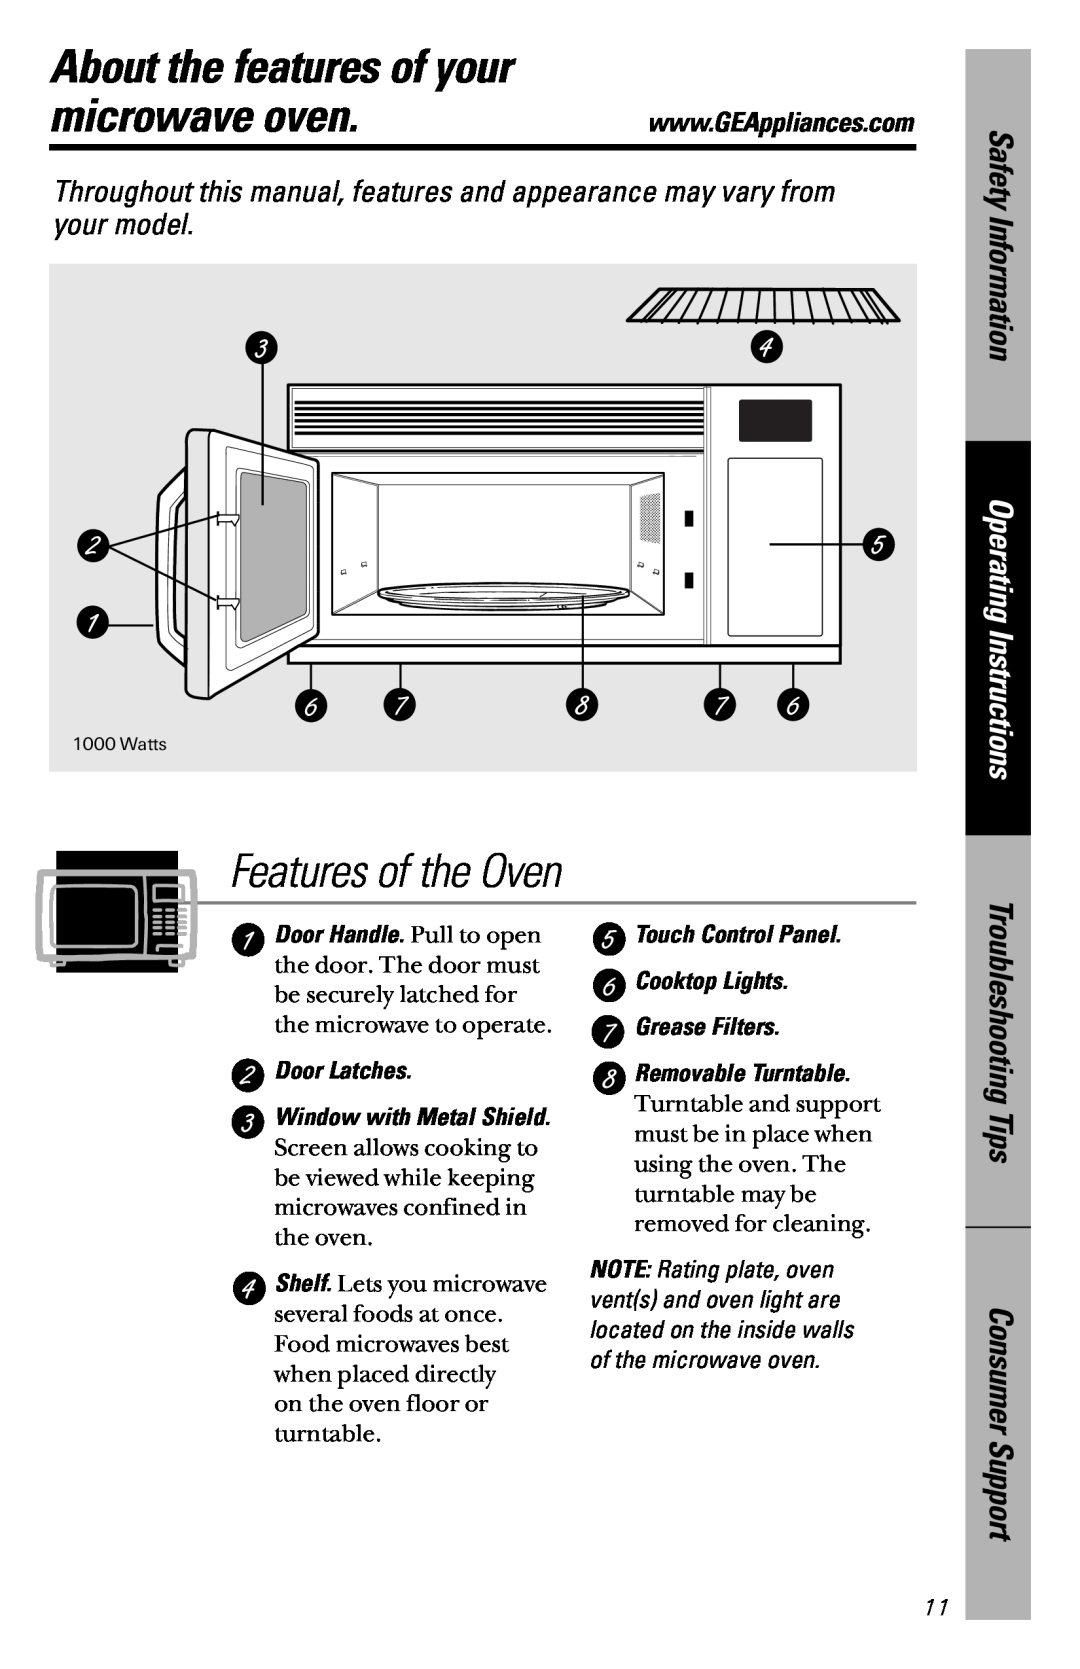 GE JVM1841 About the features of your, microwave oven, Features of the Oven, Safety Information, Operating Instructions 